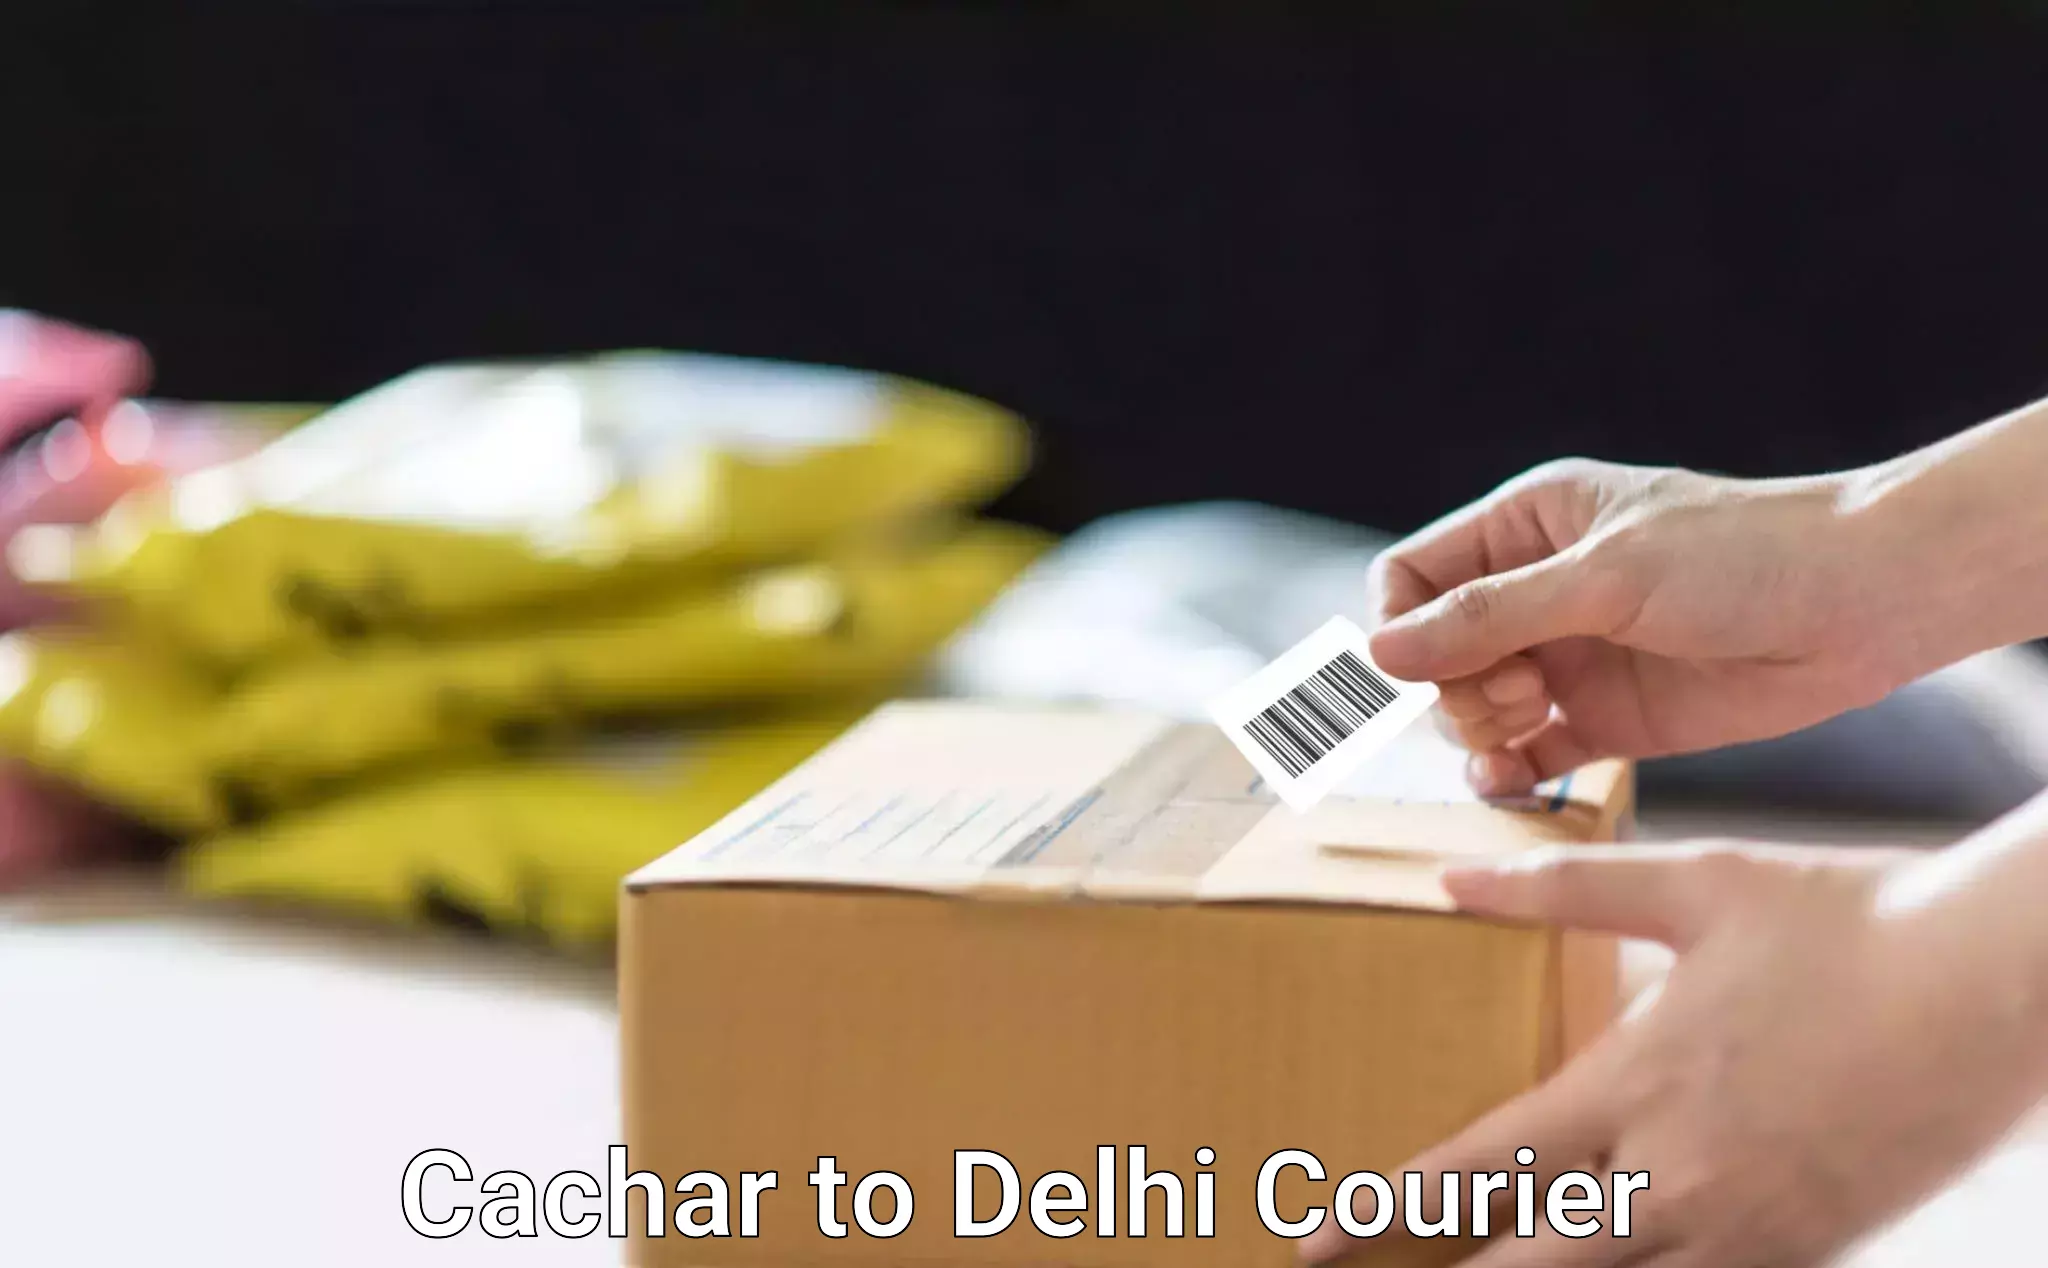 Same-day delivery solutions Cachar to Subhash Nagar